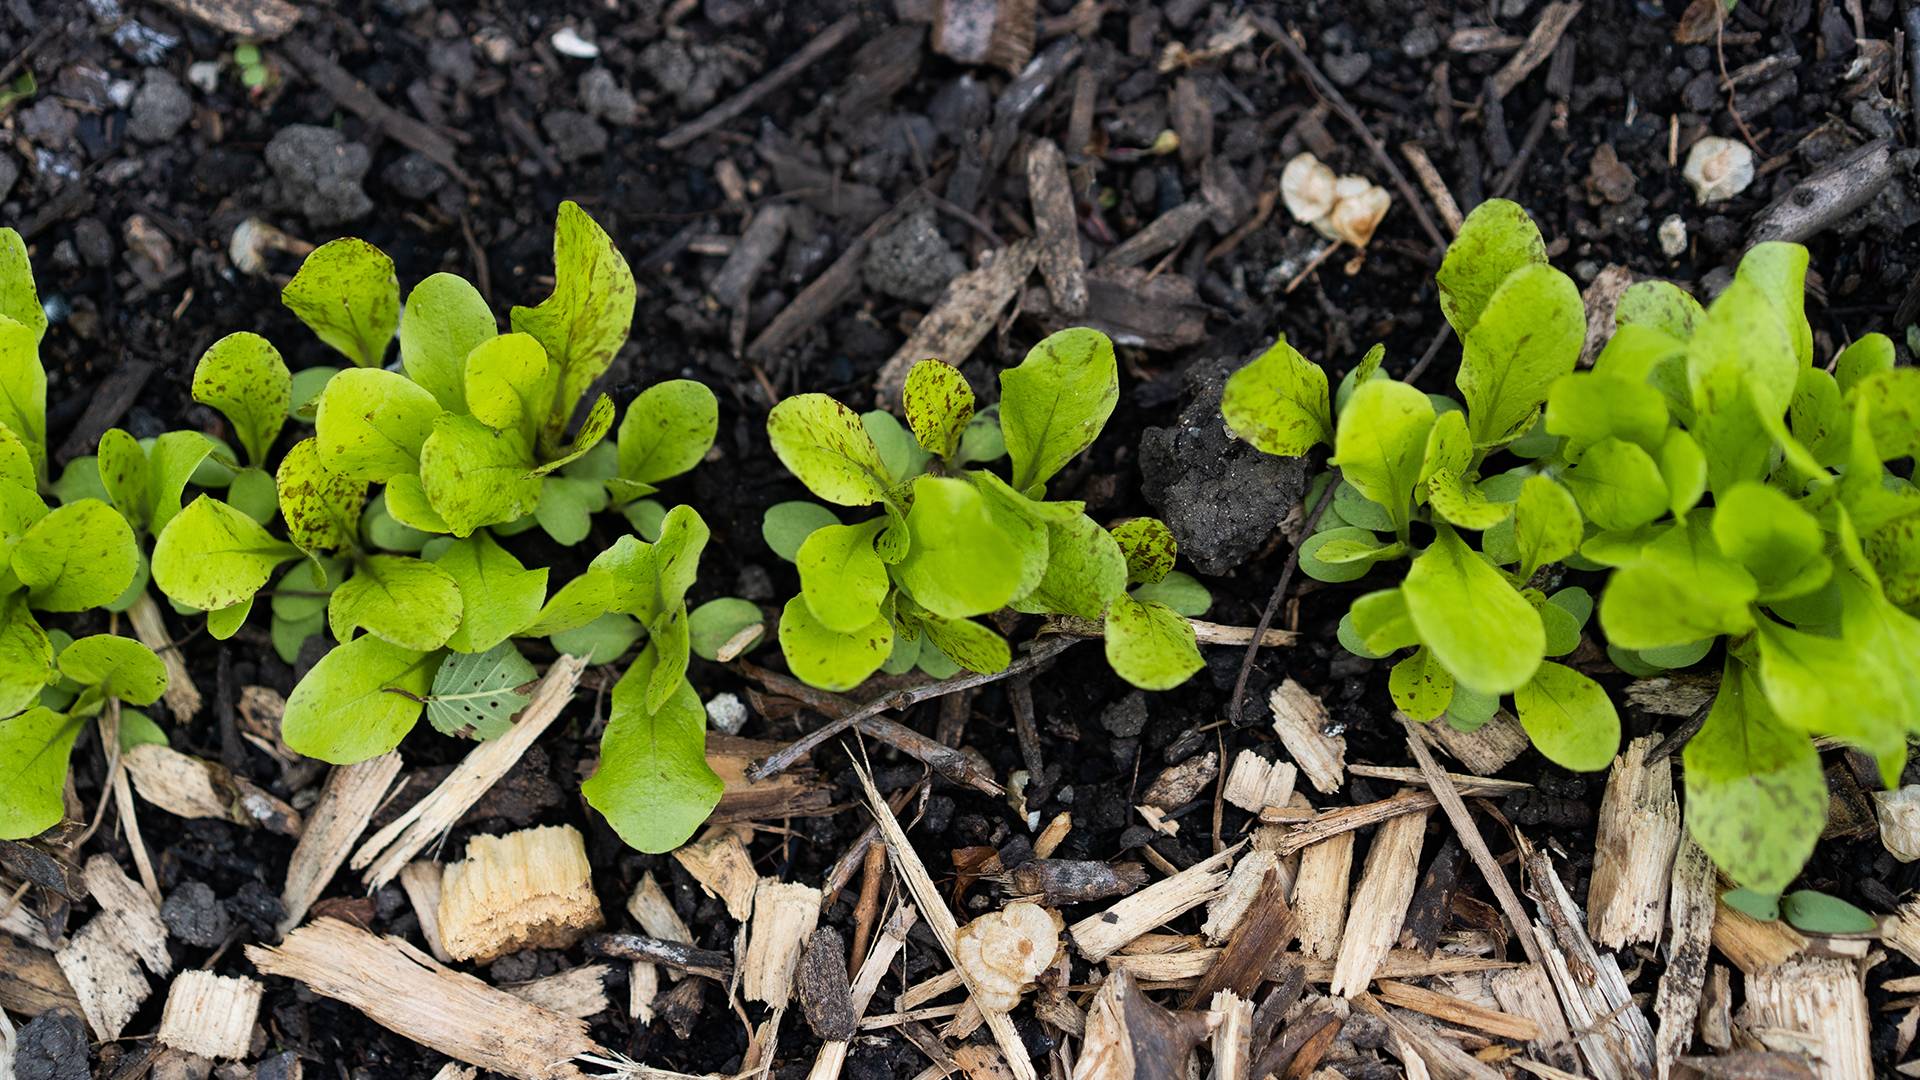 Plants sprouting in mulch covered soil